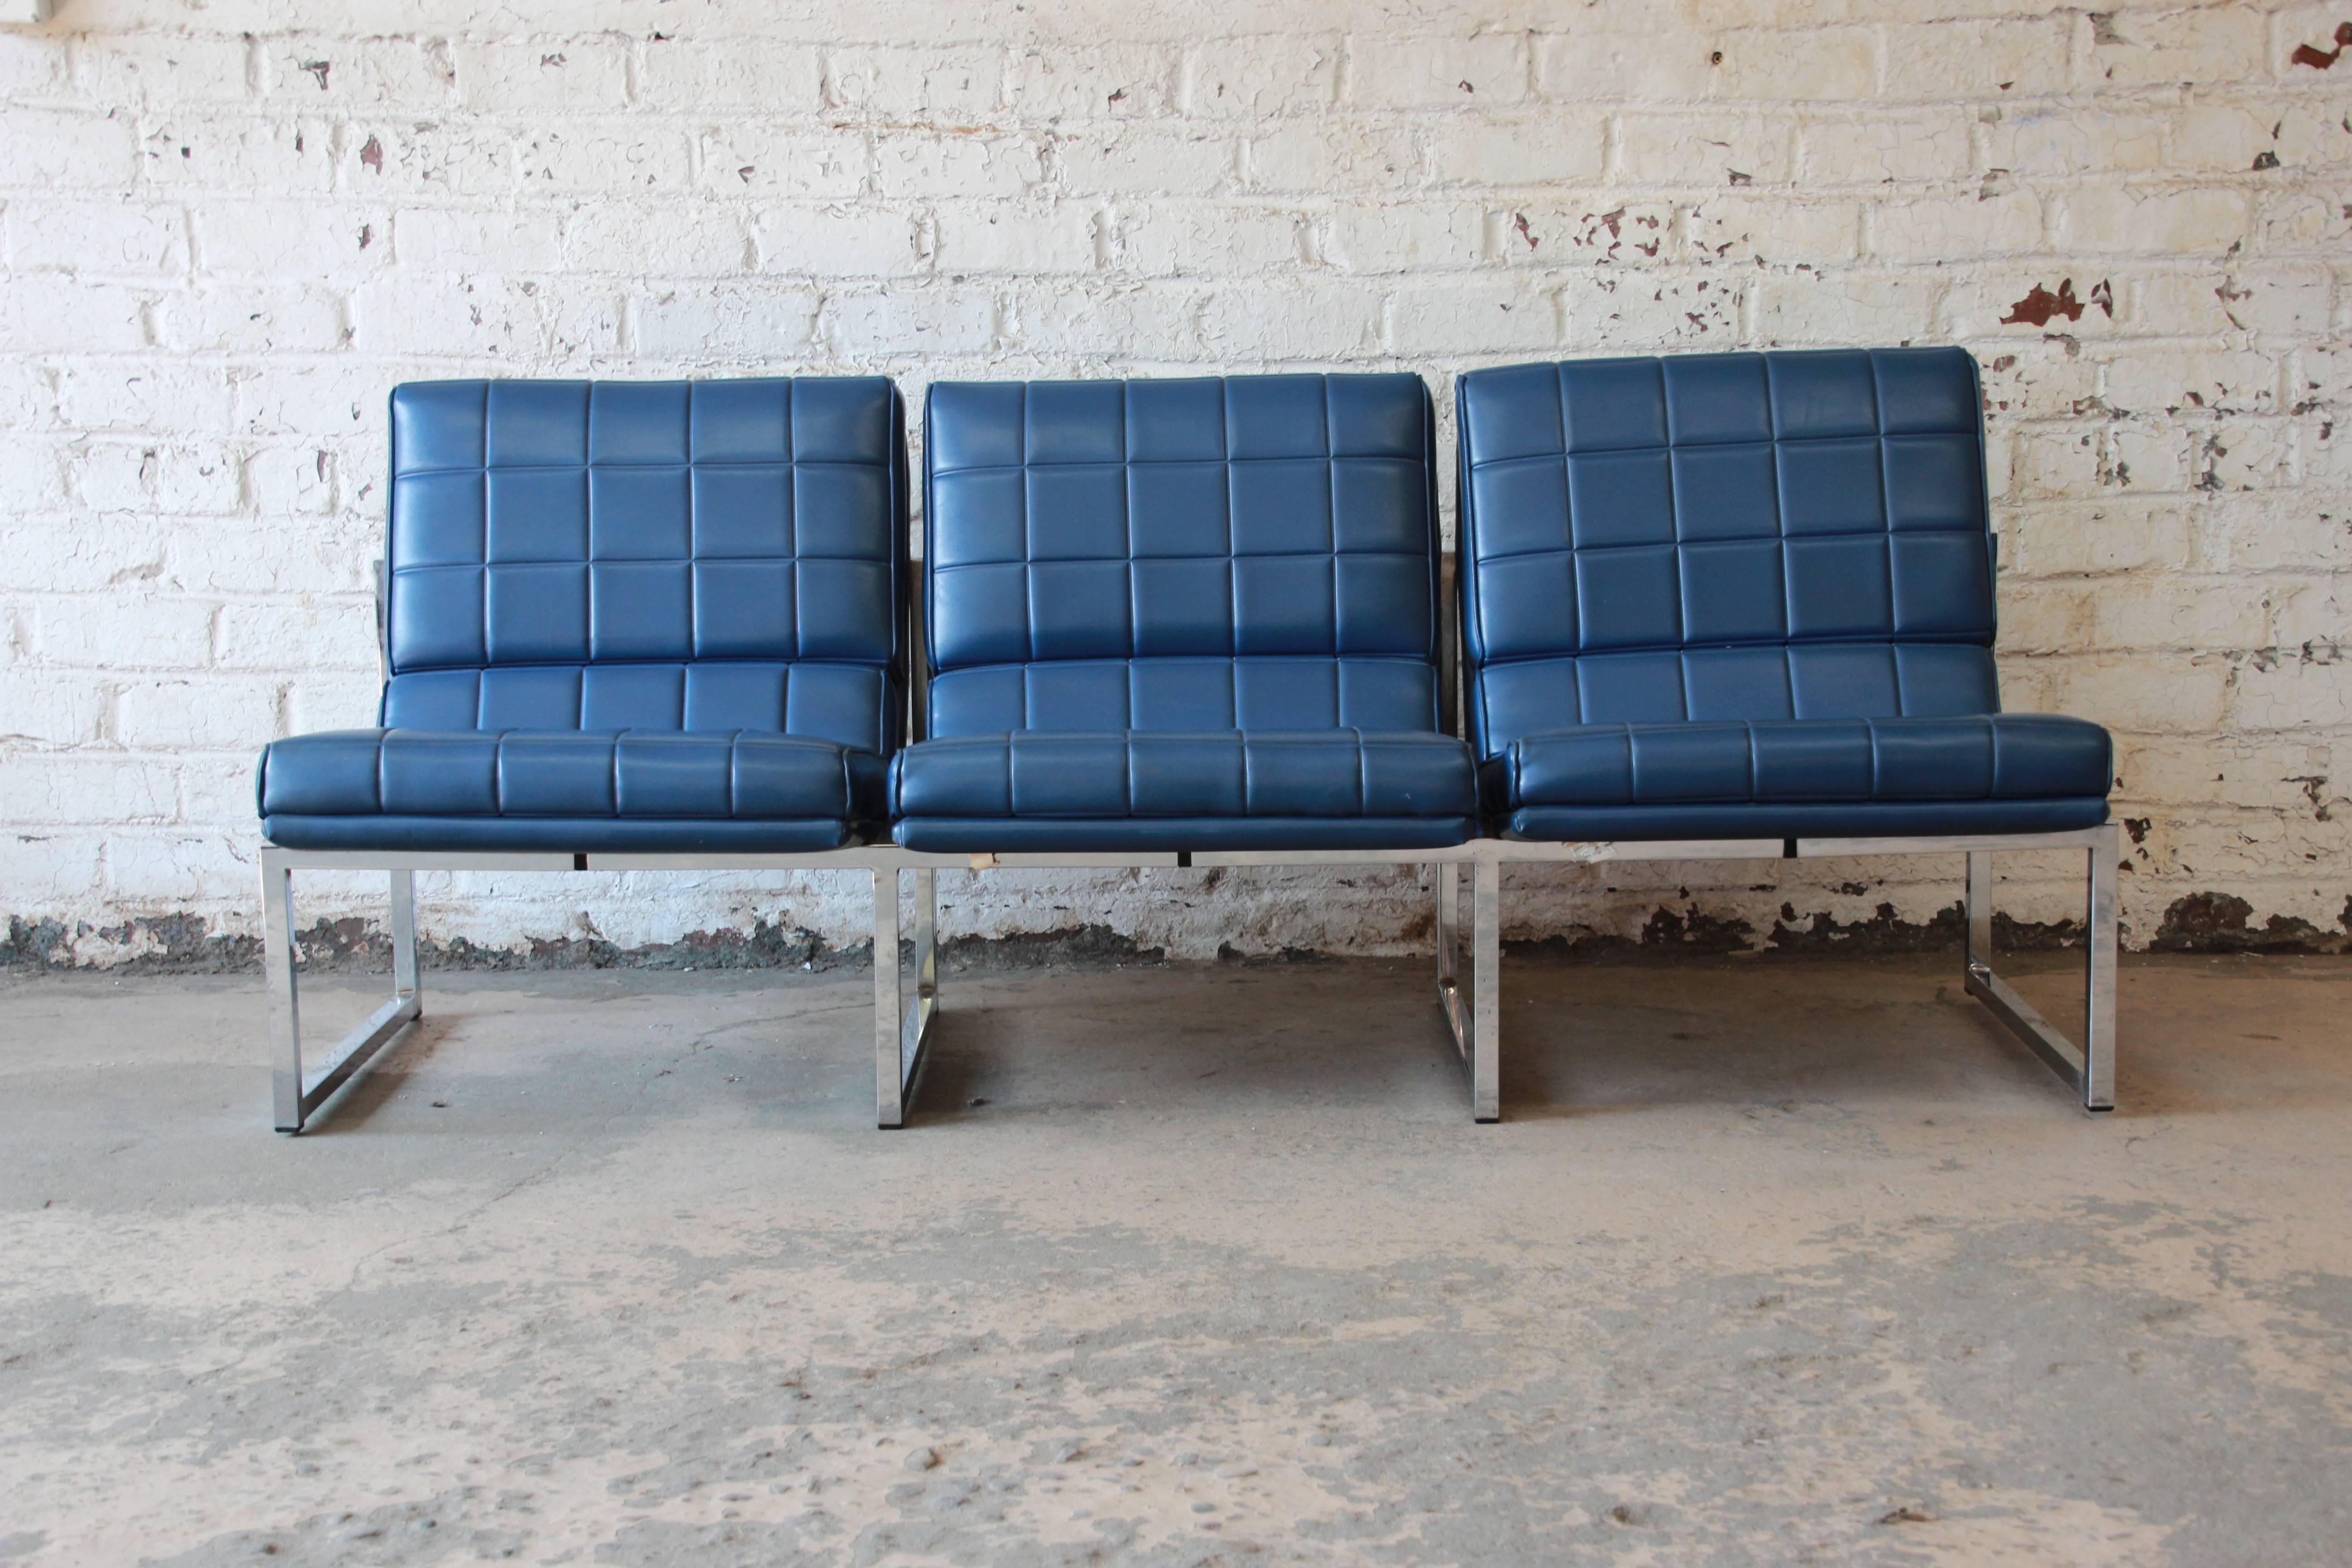 An outstanding 1970s three-seat sofa by Chromcraft. Very much in the style of iconic designer Milo Baughman, with a chrome base and modern lines. The blue vinyl upholstery is in good original condition. Foam is soft and comfortable. A nice